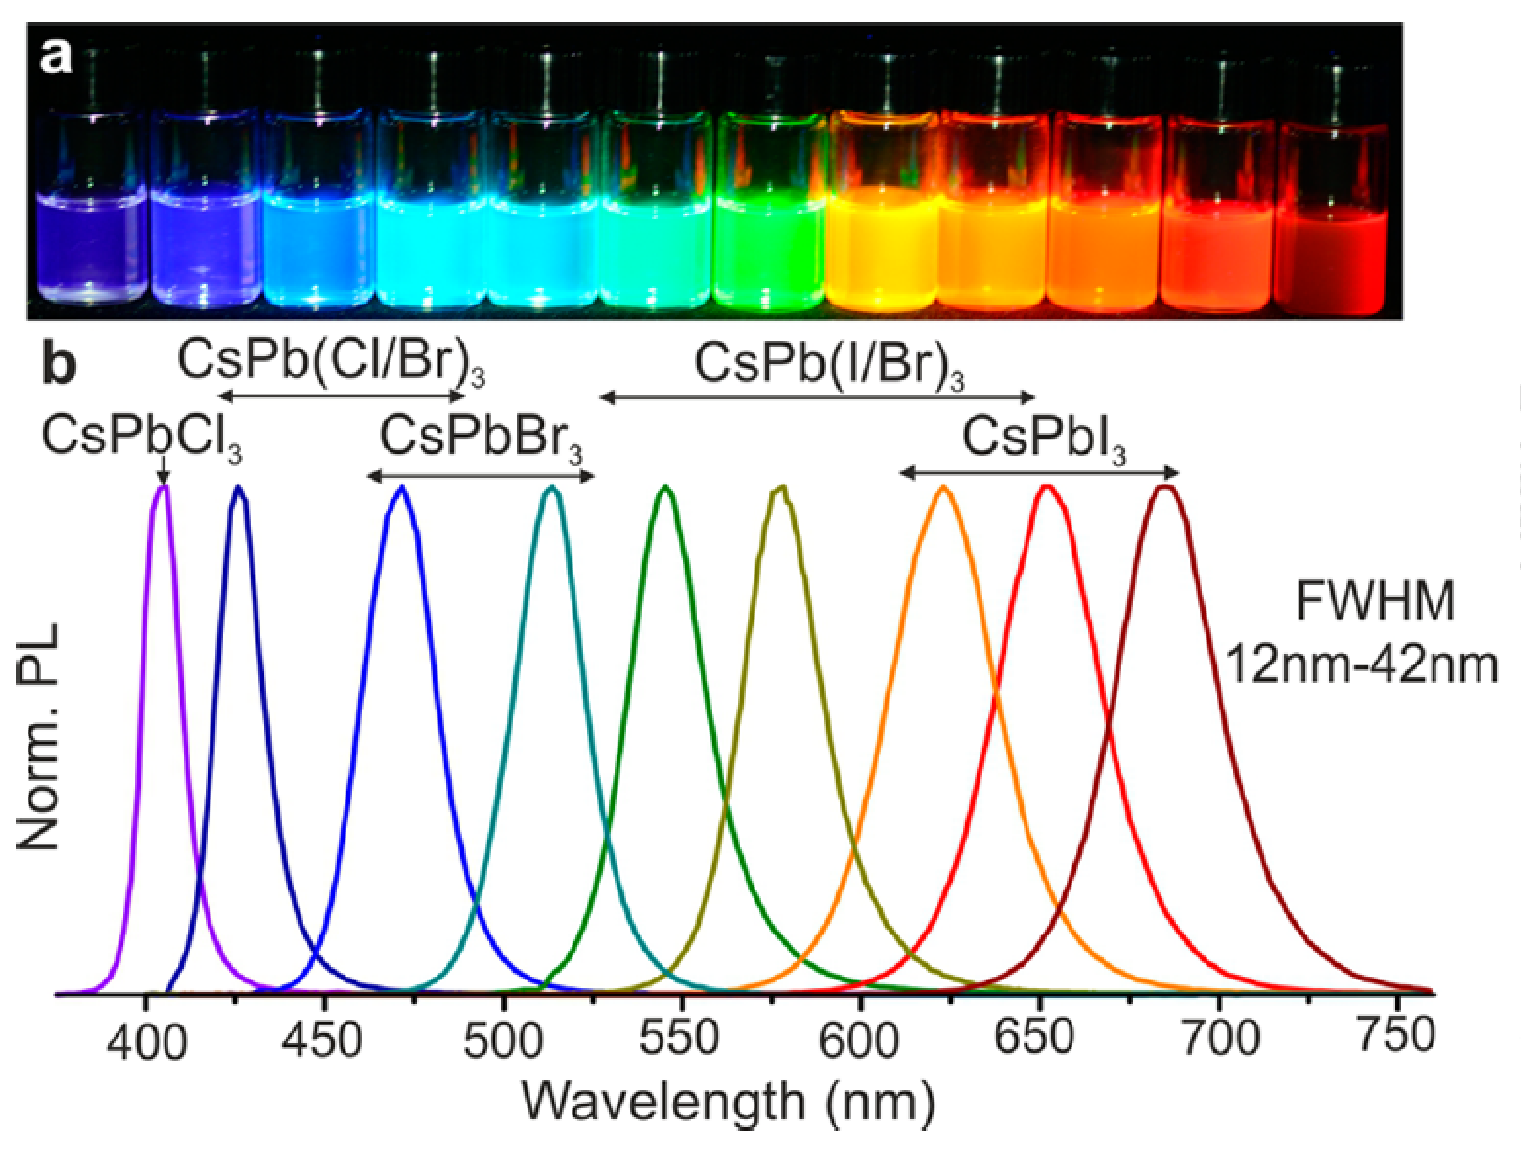 Figure 2. Color tunability of lead halide perovskites. a. Solutions containing nanocrystals of lead halide nanocrystals emitting over the visible range. b. Emission spectrum of lead halide perovskites depending on their halide composition. Figure obtained from the works done by Protesescu et al.7